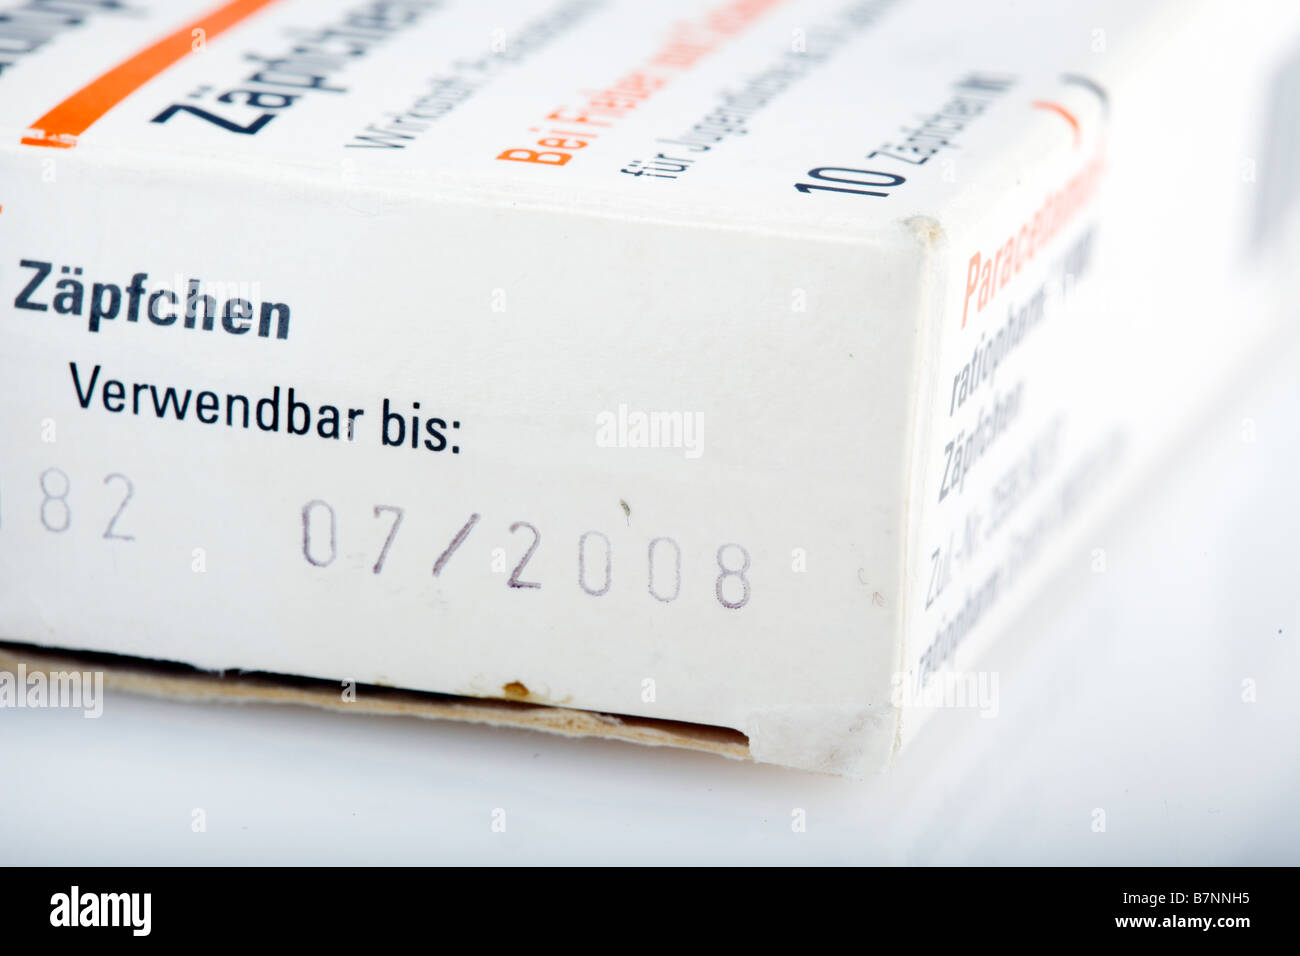 Expiration date for medicines Stock Photo